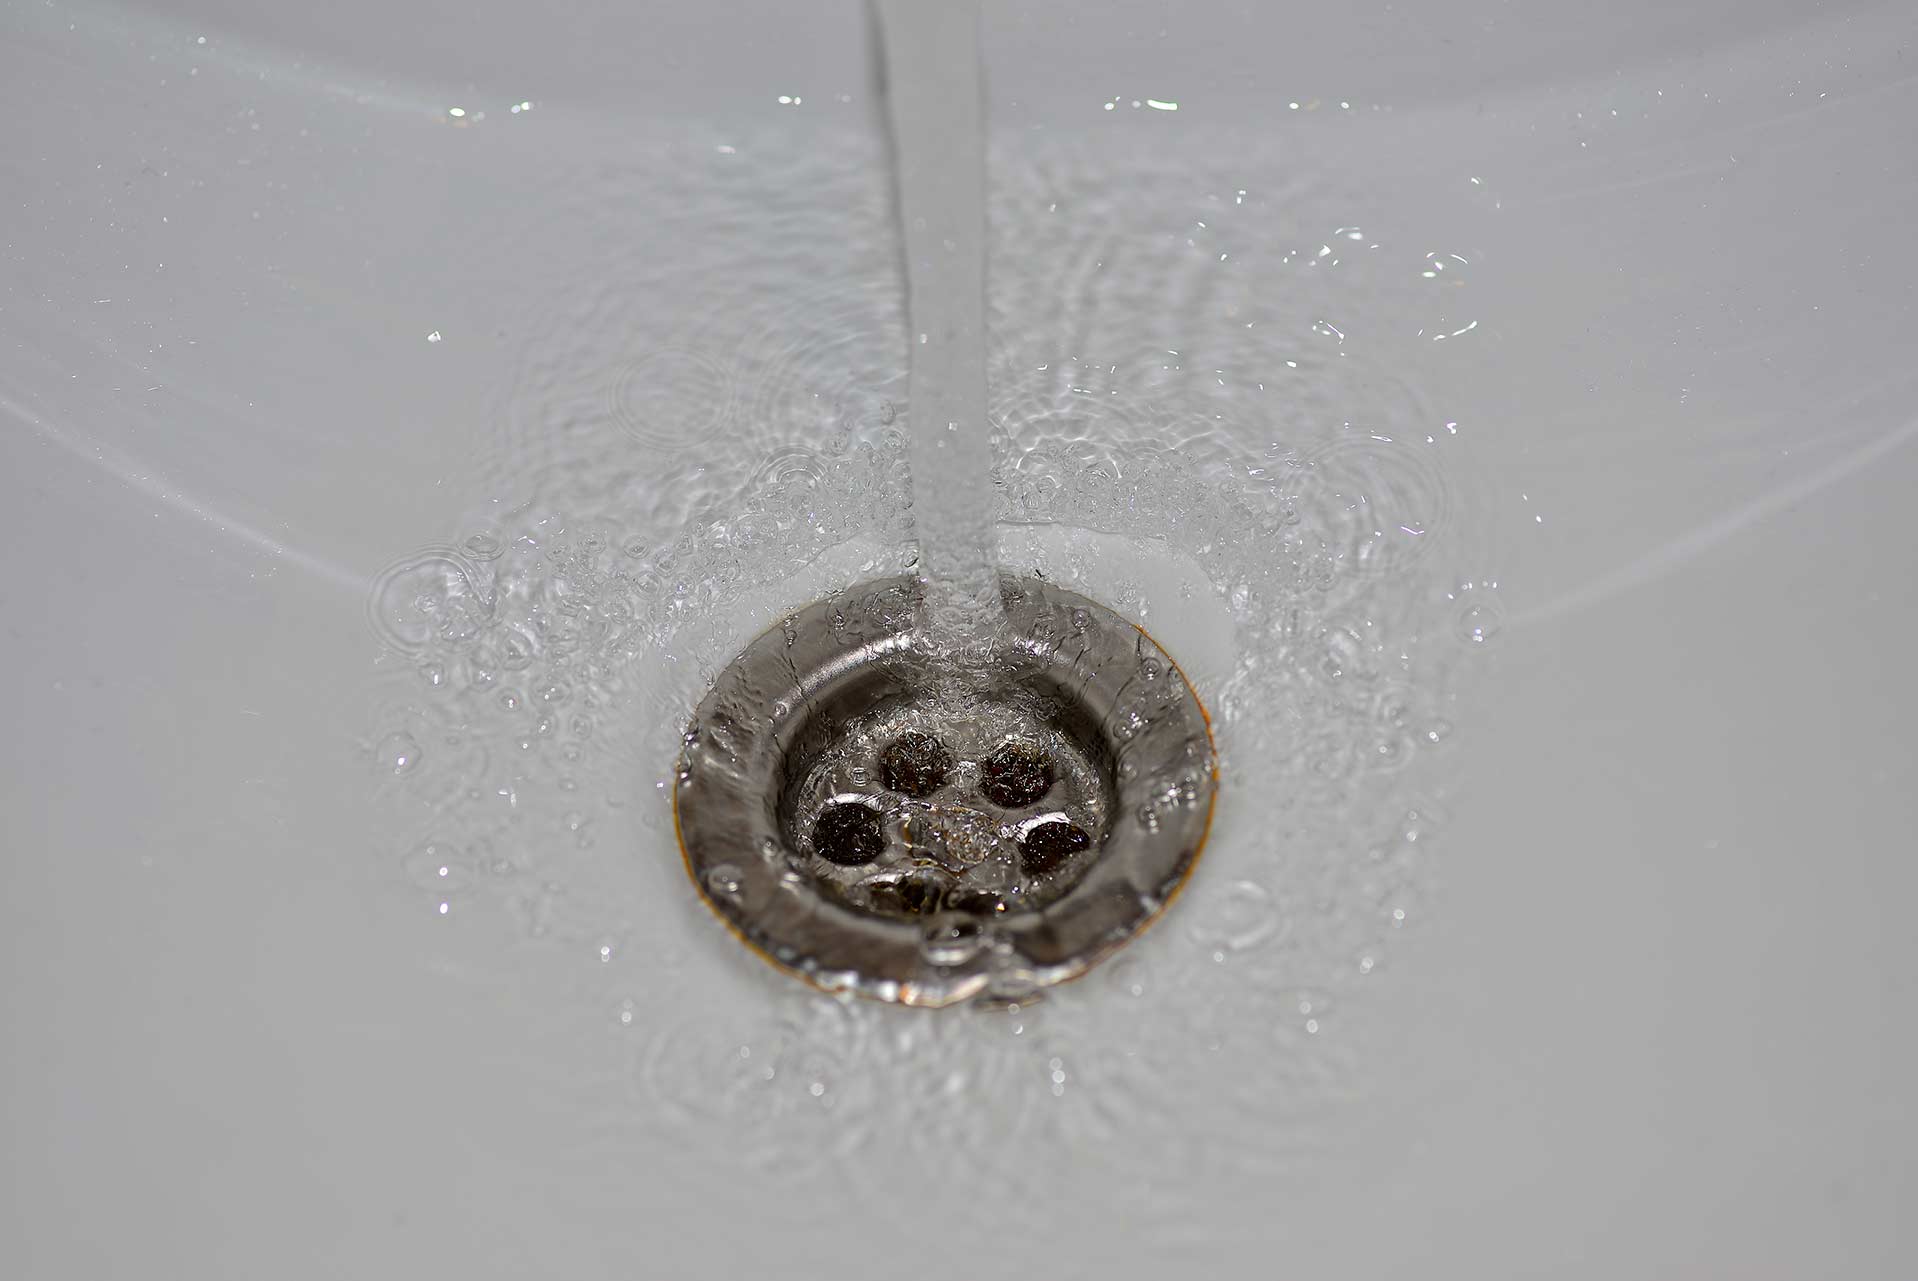 A2B Drains provides services to unblock blocked sinks and drains for properties in Ipswich.